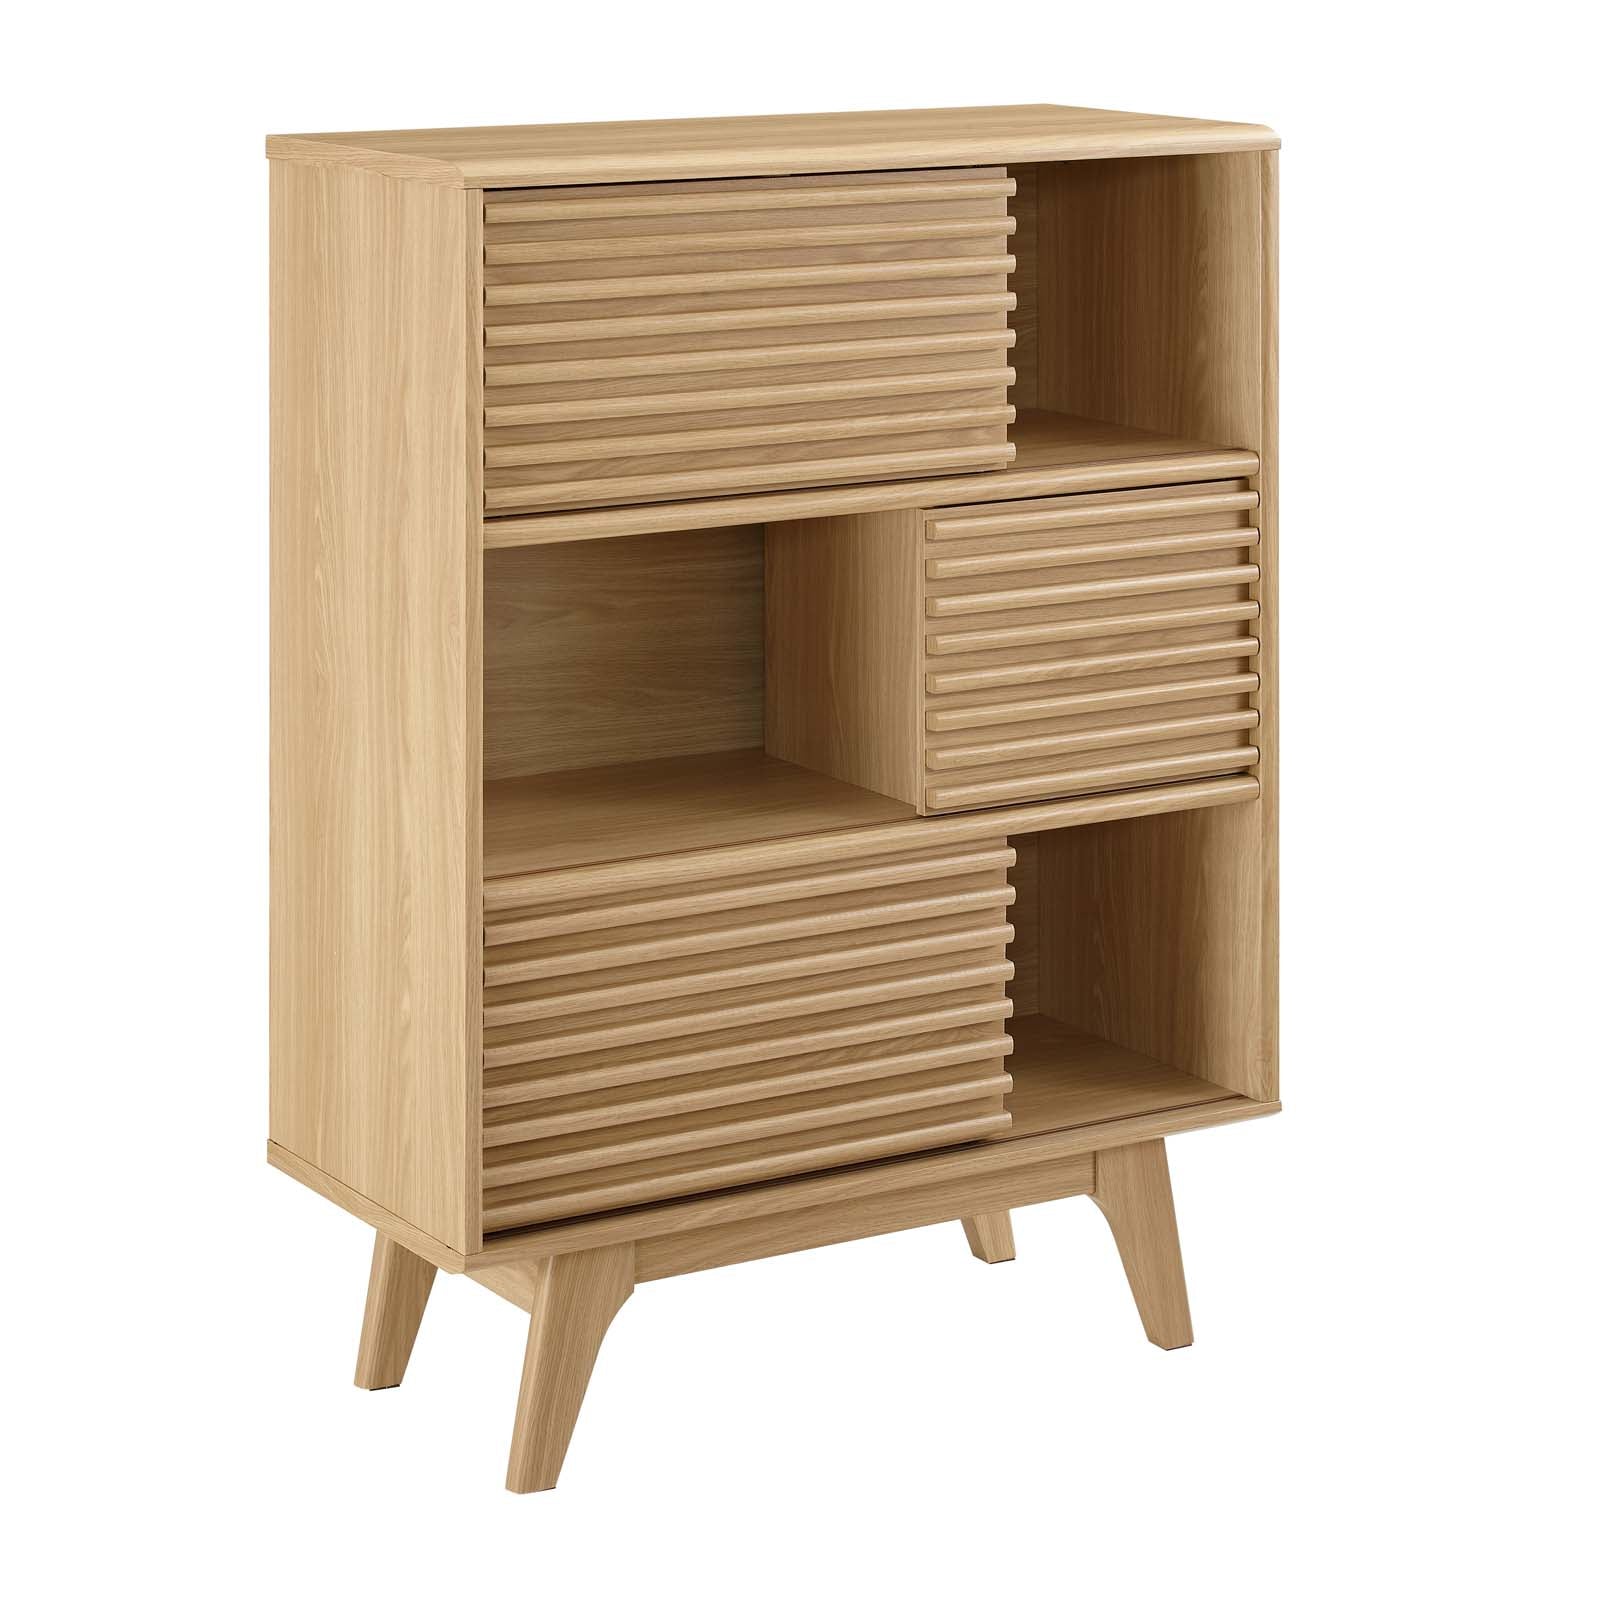 Modway Bookcases & Display Units - Render-Three-Tier-Display-Storage-Cabinet-Stand-Oak